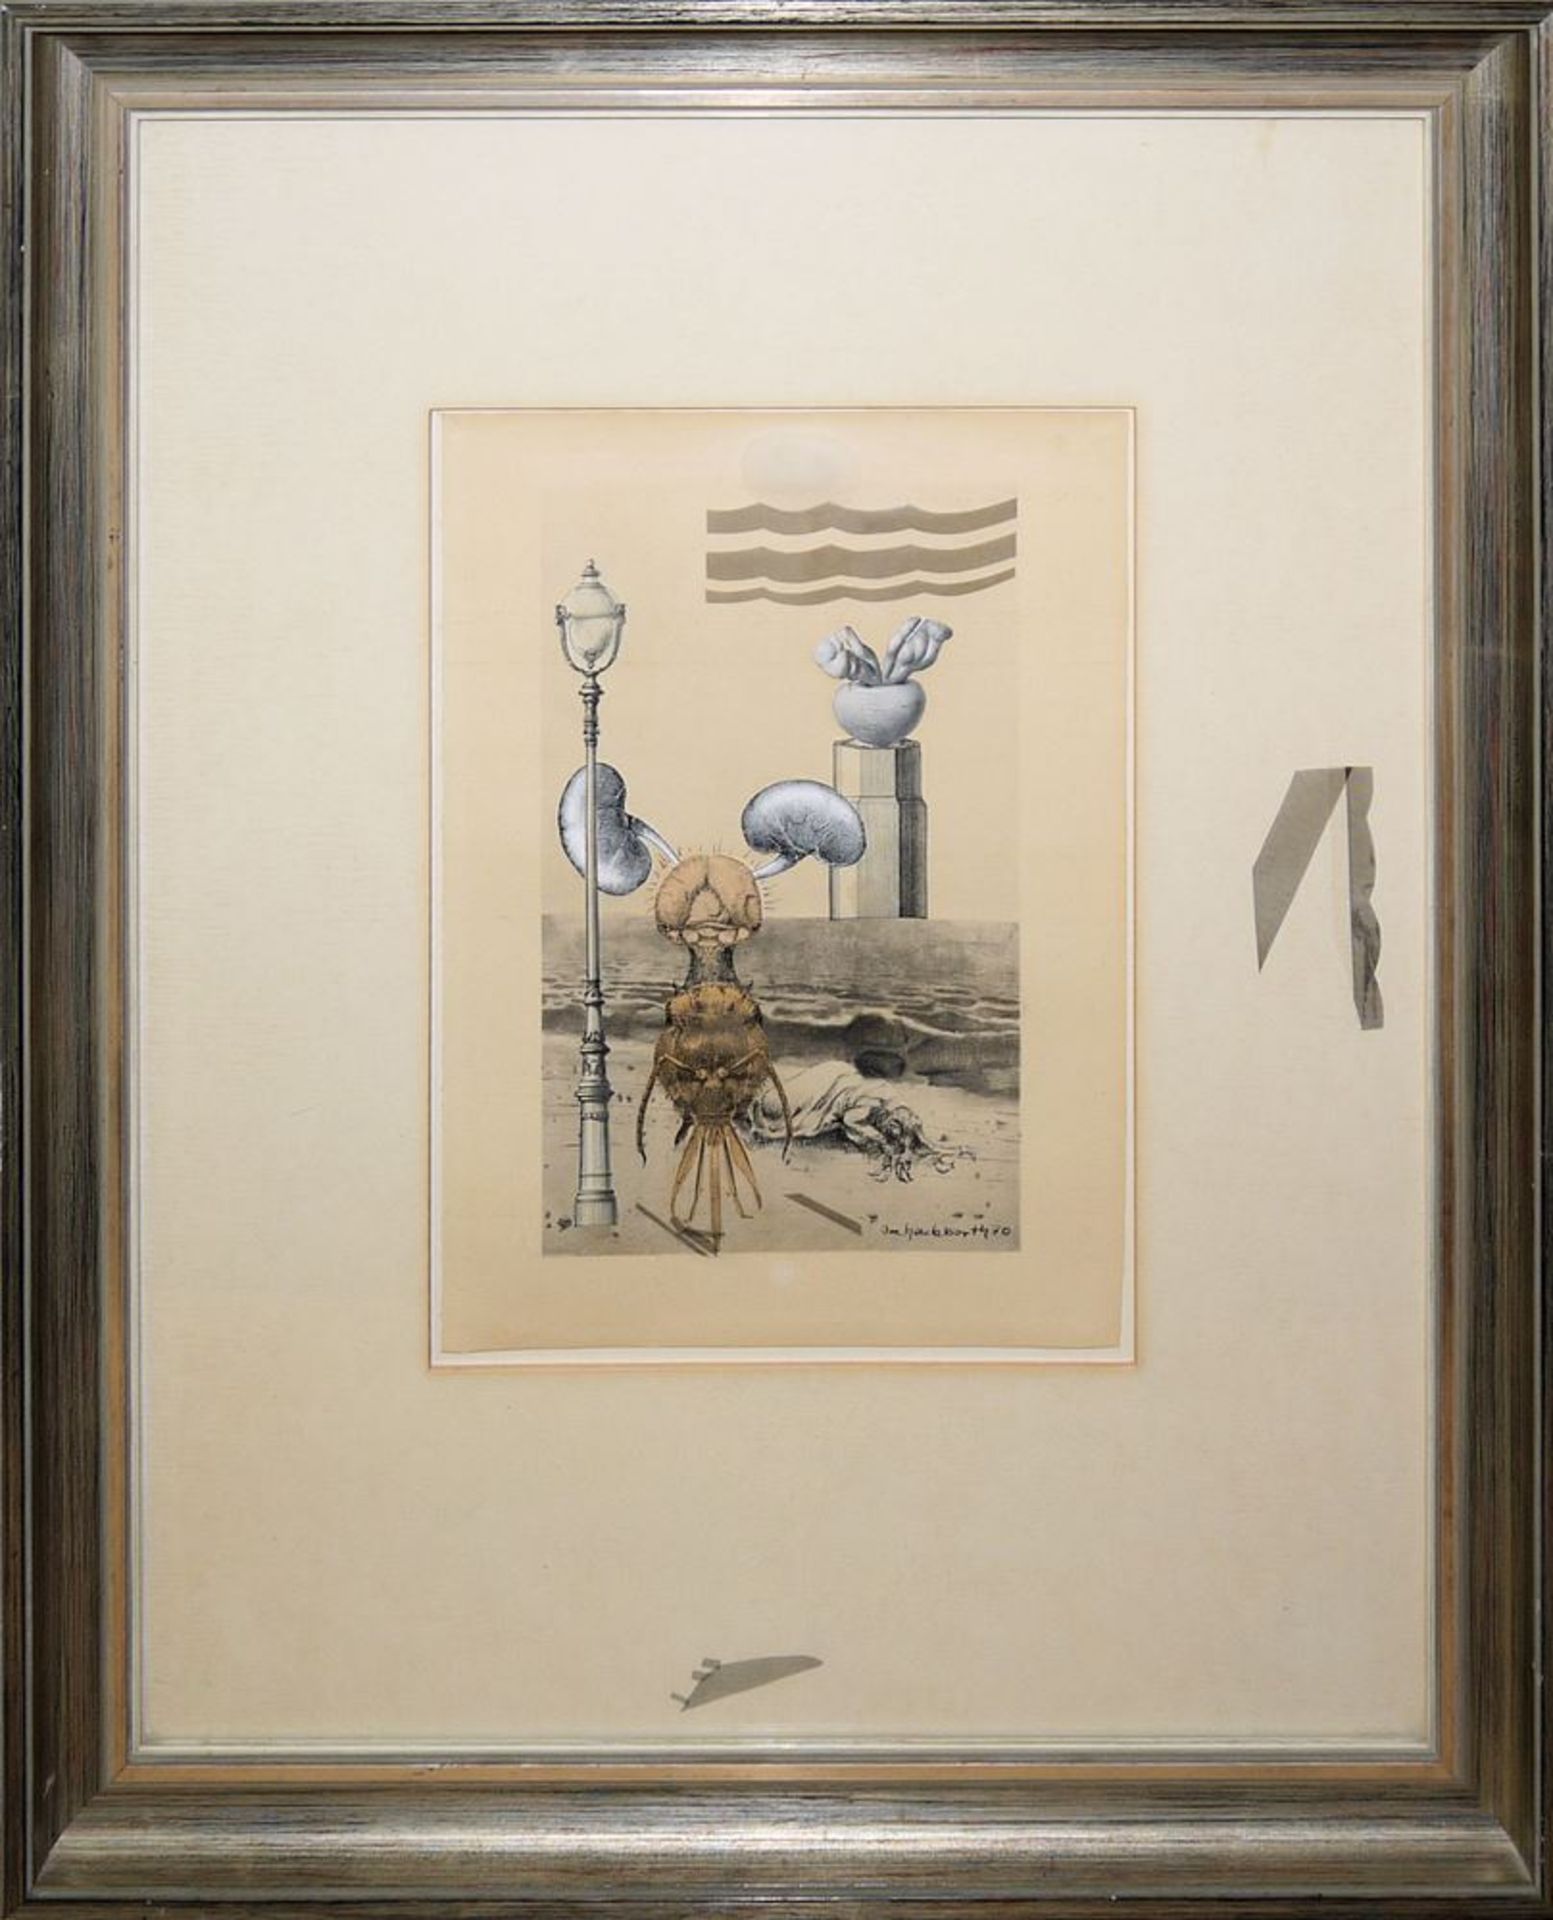 Joe Hackbarth, Sea Creatures with Street Lamp and Kidneys, surreal collage from 1970, framed